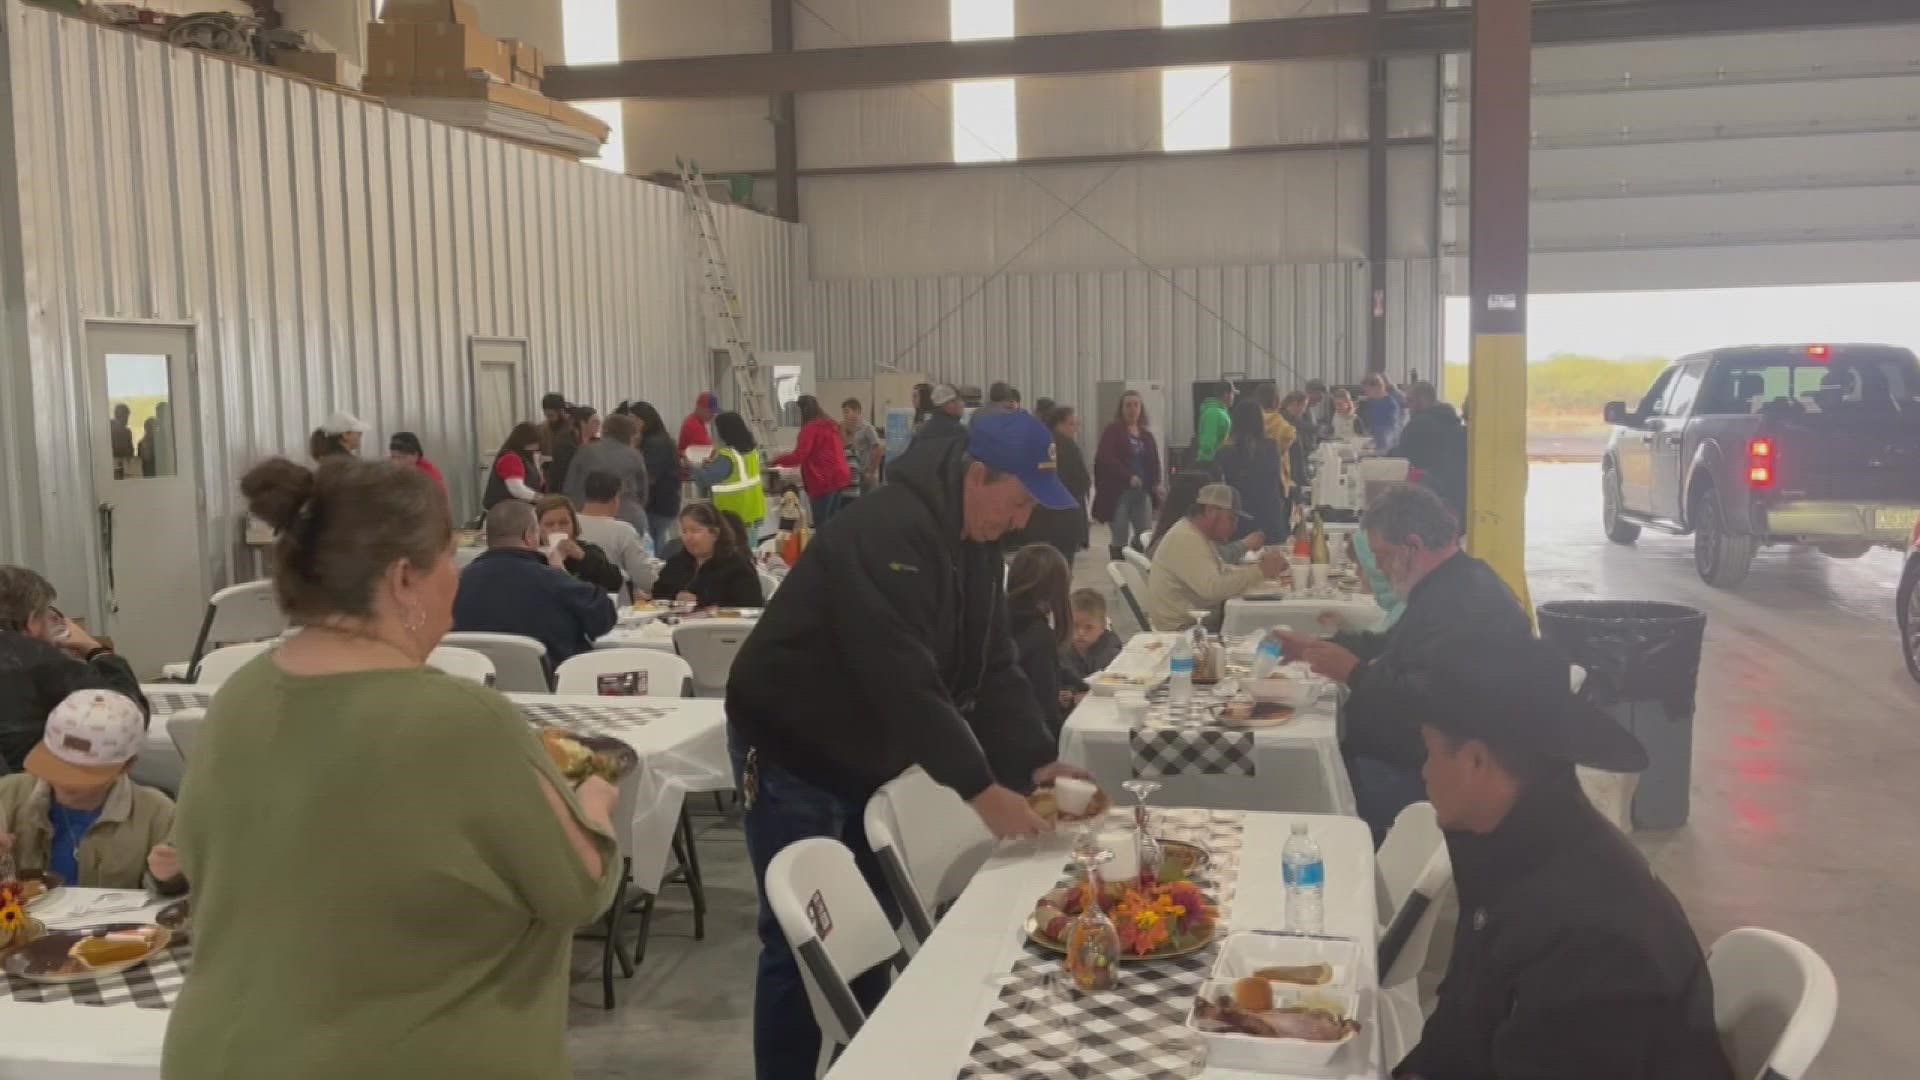 Several organizations offered free meals for those around the Permian Basin.